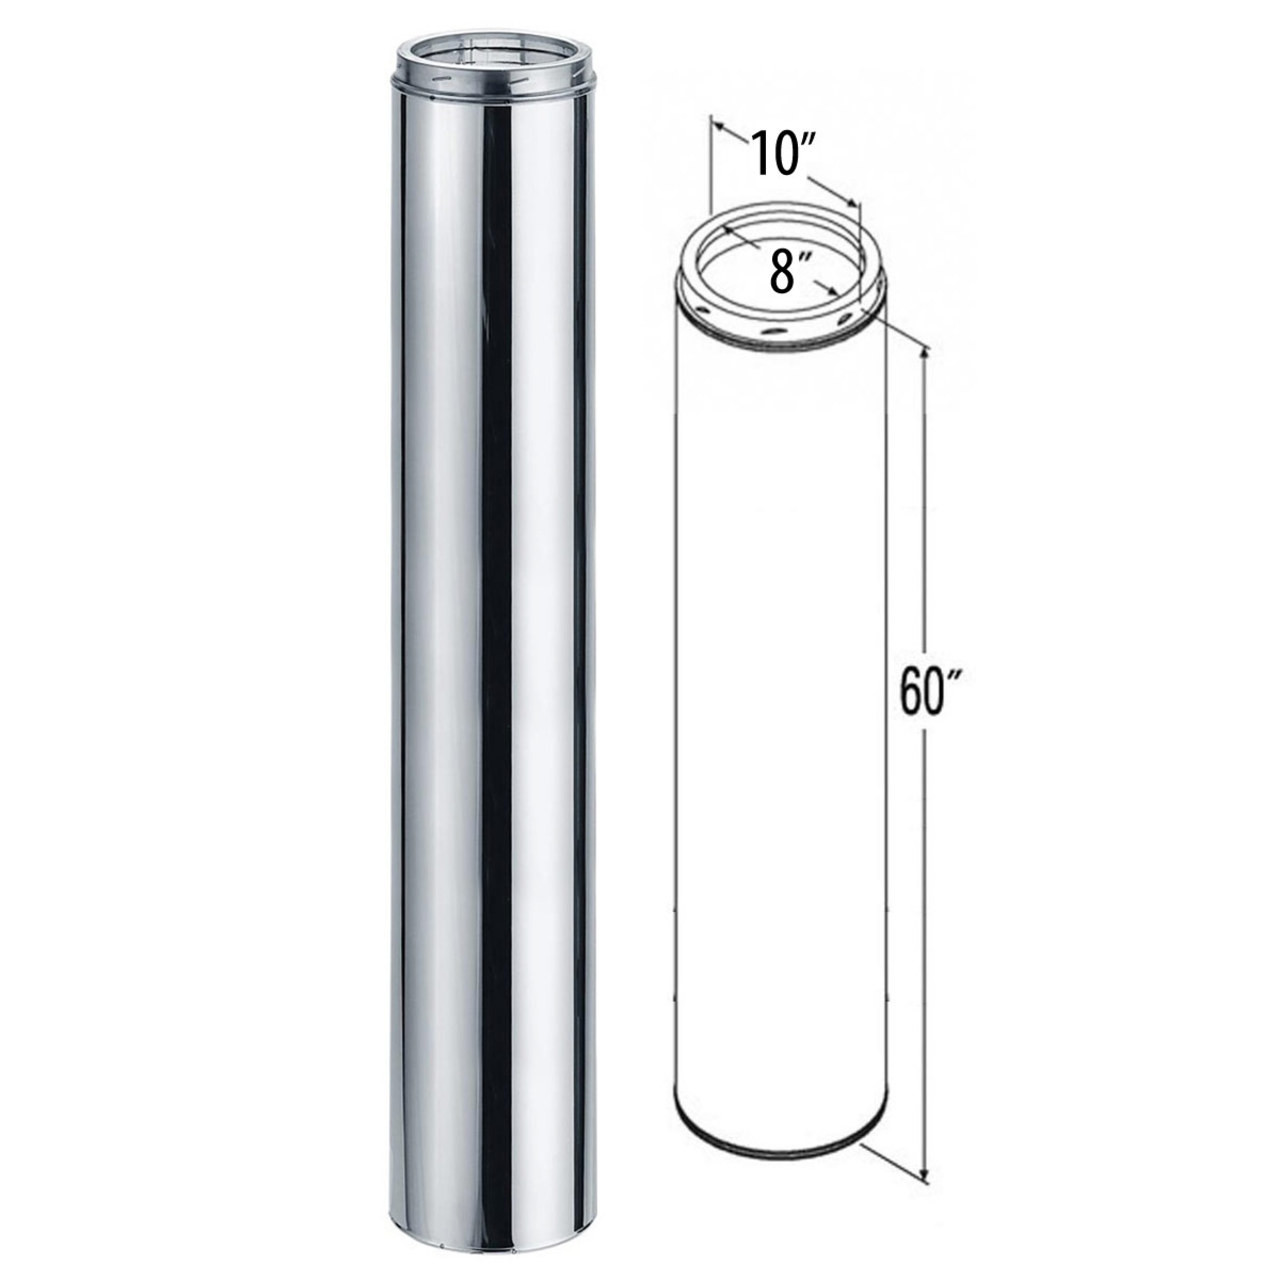 8'' x 60'' DuraTech Stainless Steel Chimney Pipe - 9609CF